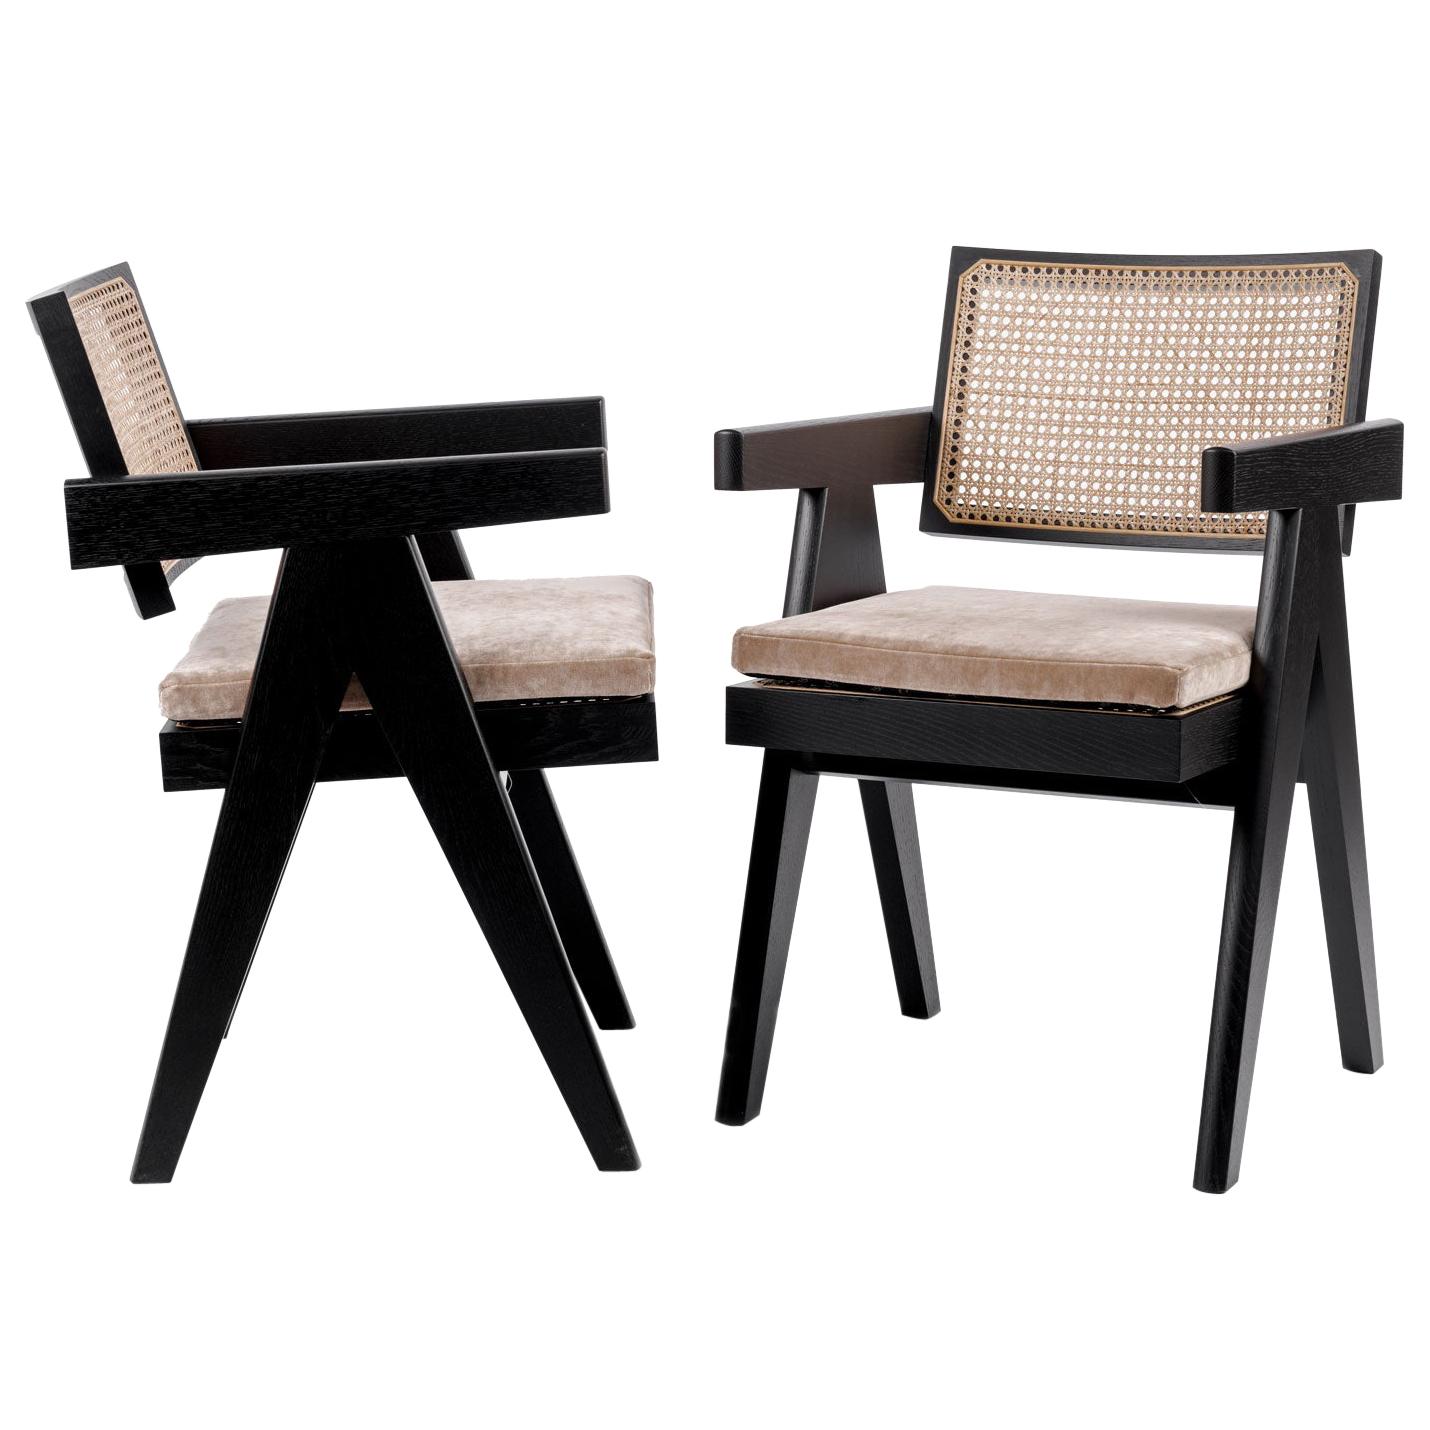 Black Oak Stained Frame Chair with Woven Cane Seat + Back with Cushion, Cassina